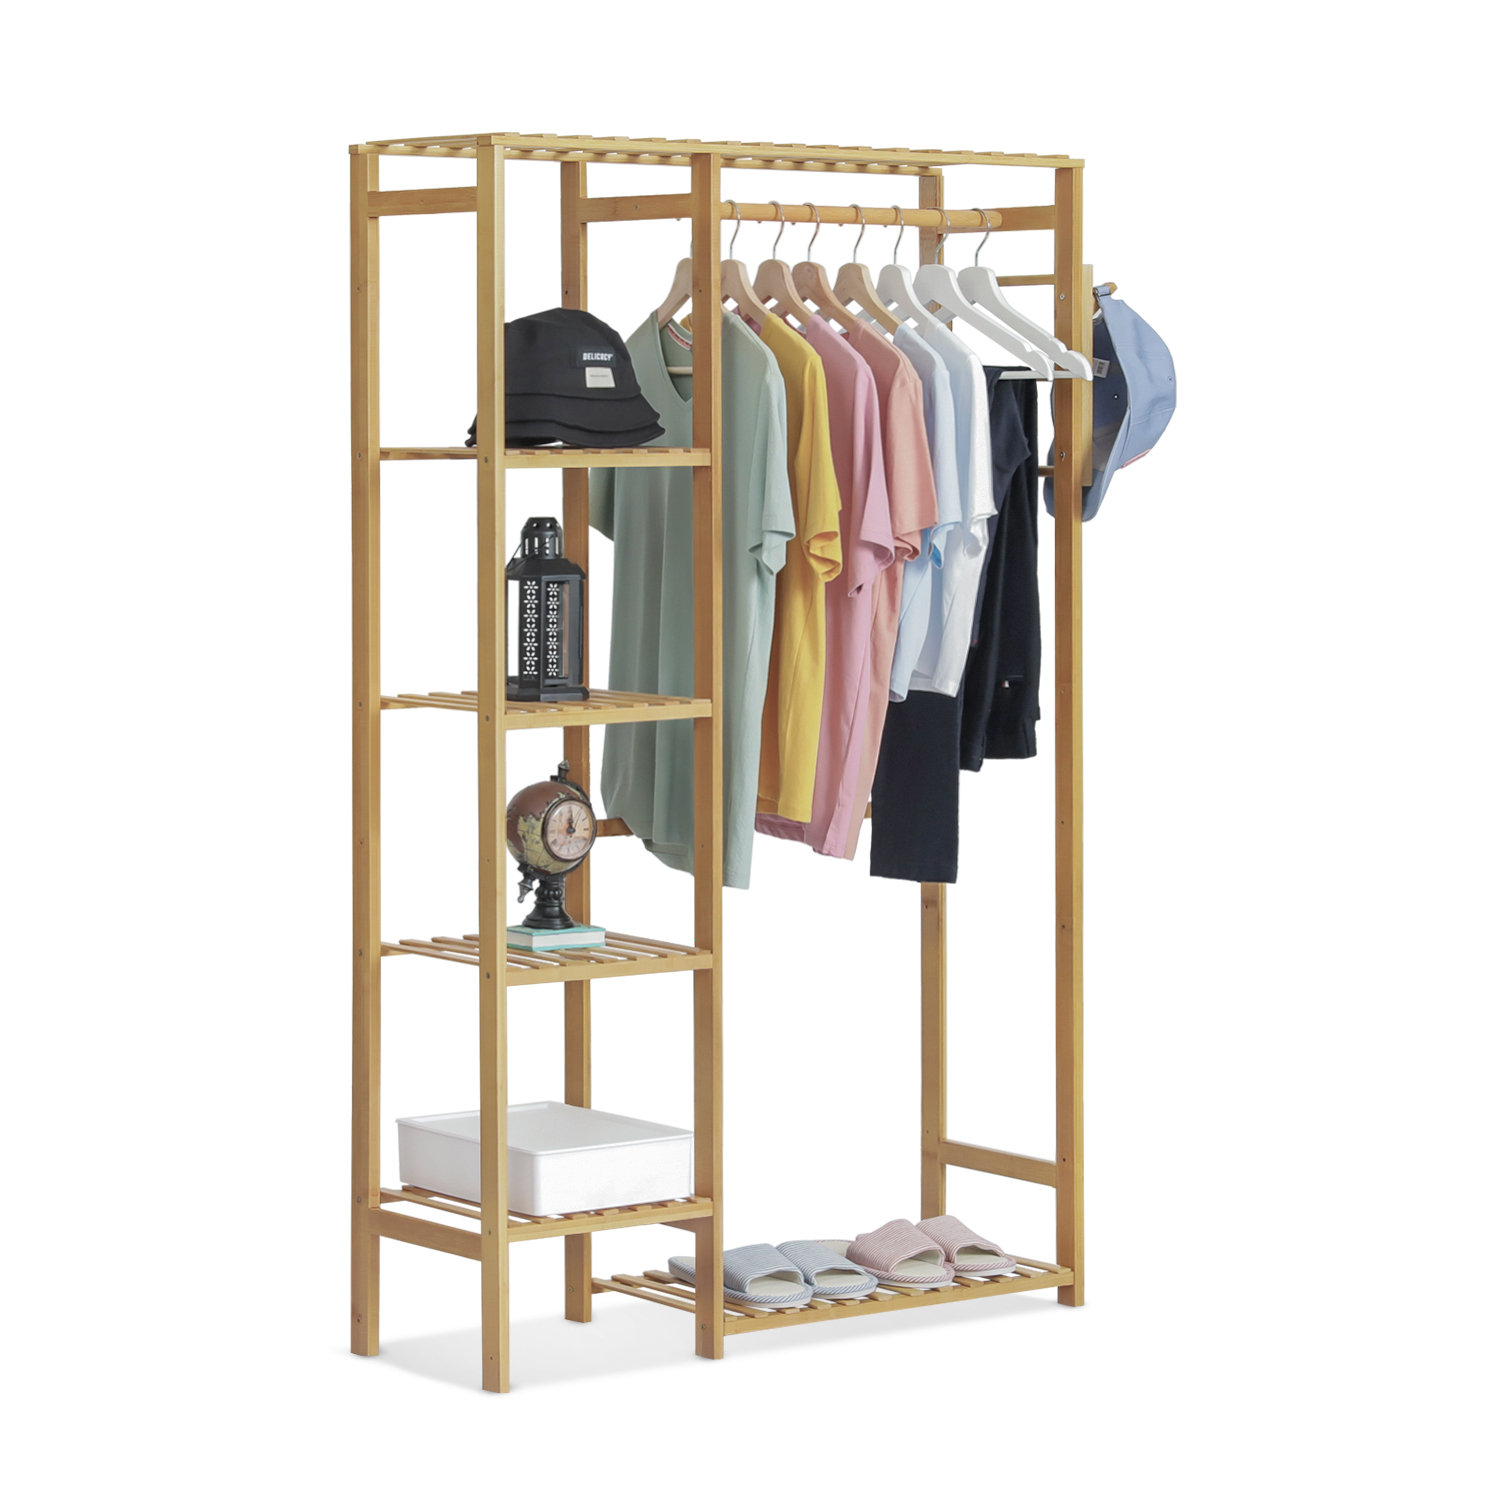 6 Tier Ladder Strong Wooden Clothes Rail Garment Rack with Top Rod